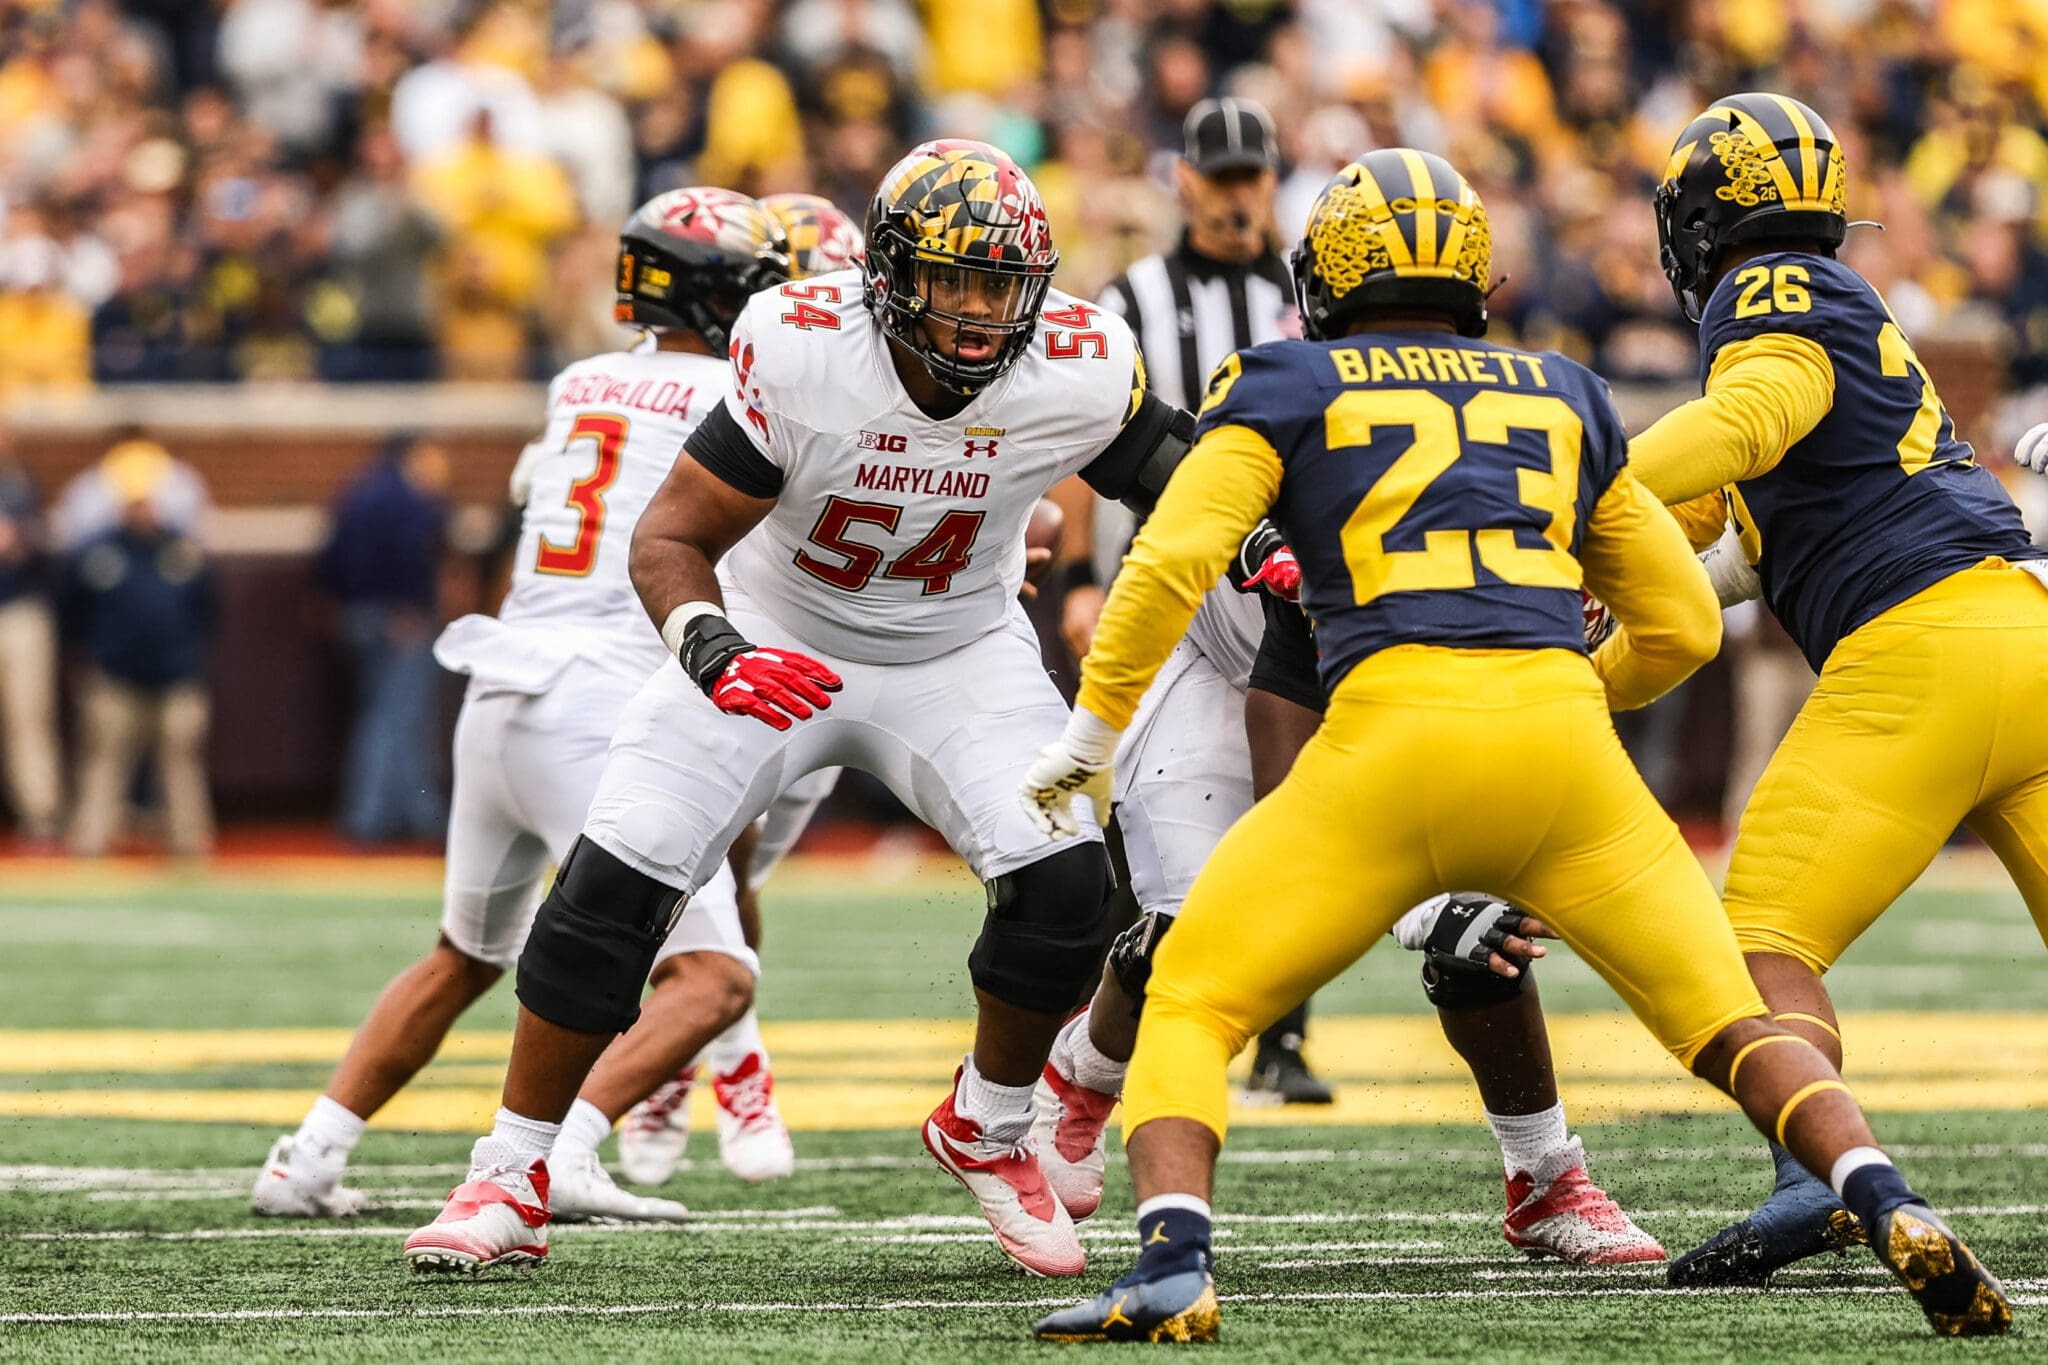 Maryland tackle Spencer Anderson is a chess whiz off the field